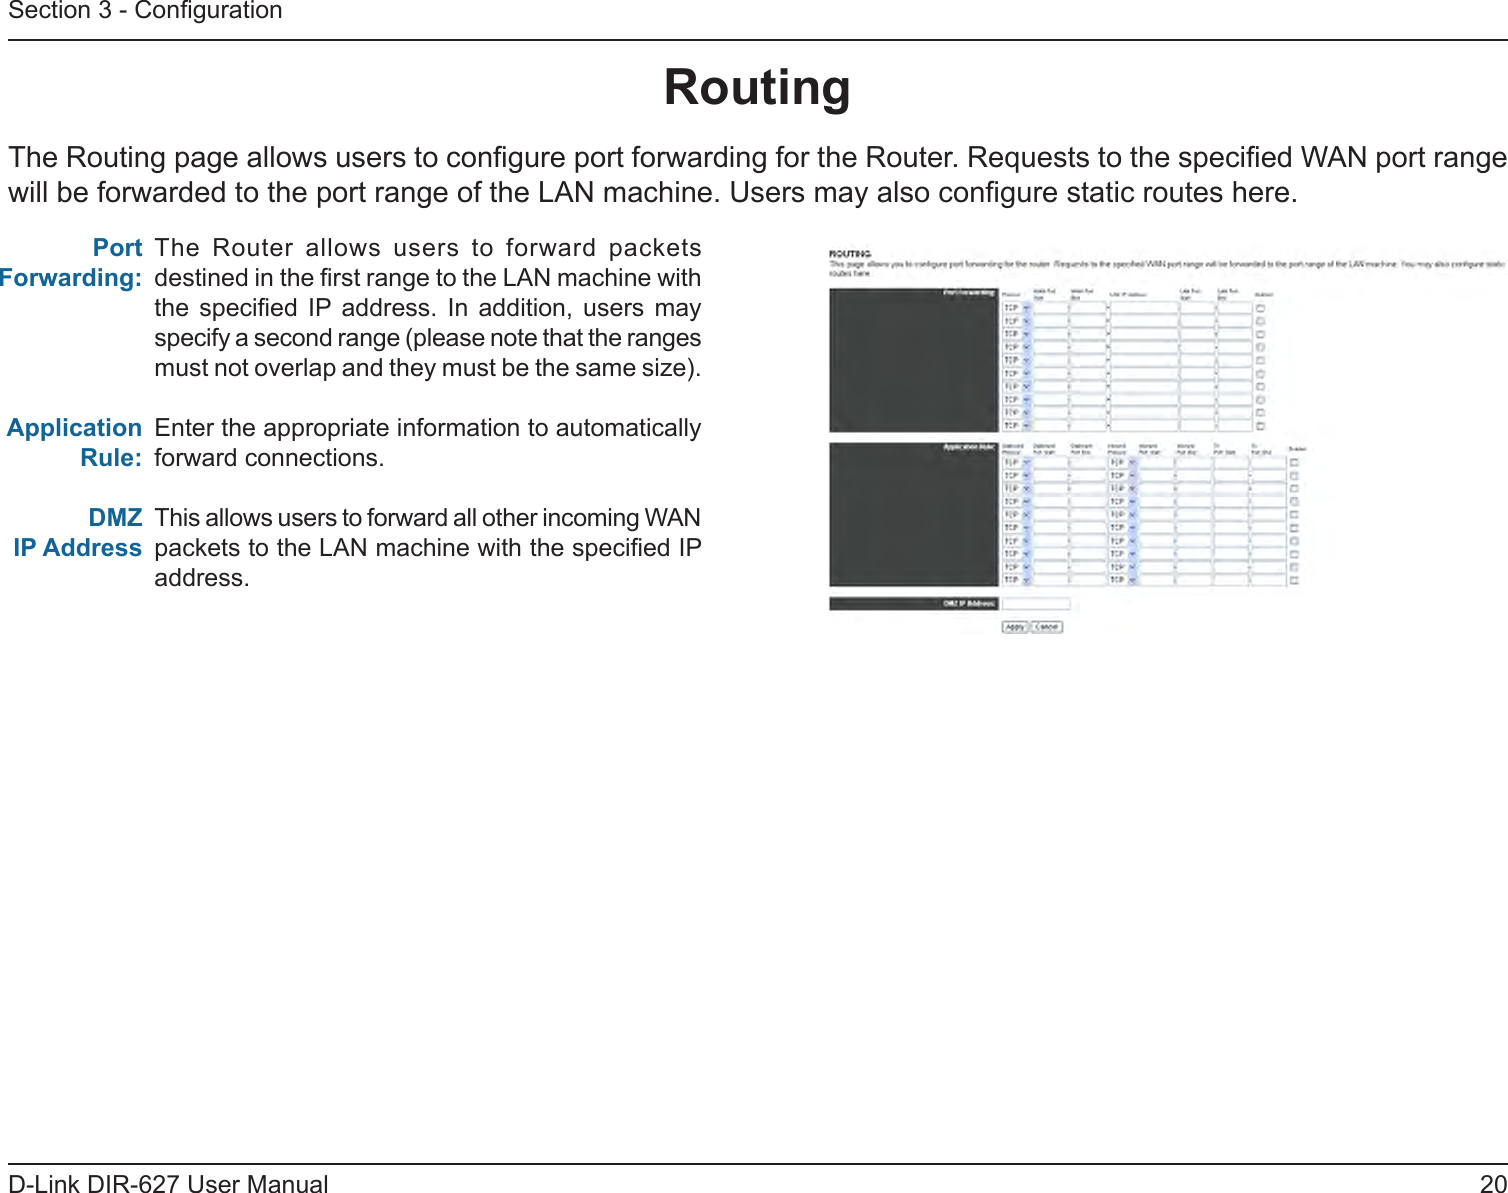 20D-Link DIR-627 User ManualSection 3 - CongurationRouting The Routing page allows users to congure port forwarding for the Router. Requests to the specied WAN port range will be forwarded to the port range of the LAN machine. Users may also congure static routes here.The  Router  allows  users  to  forward  packets destined in the rst range to the LAN machine with the  specied  IP address.  In  addition,  users  may specify a second range (please note that the ranges must not overlap and they must be the same size).Enter the appropriate information to automatically forward connections.This allows users to forward all other incoming WAN packets to the LAN machine with the specied IP address.Port Forwarding:ApplicationRule:DMZIPAddress 